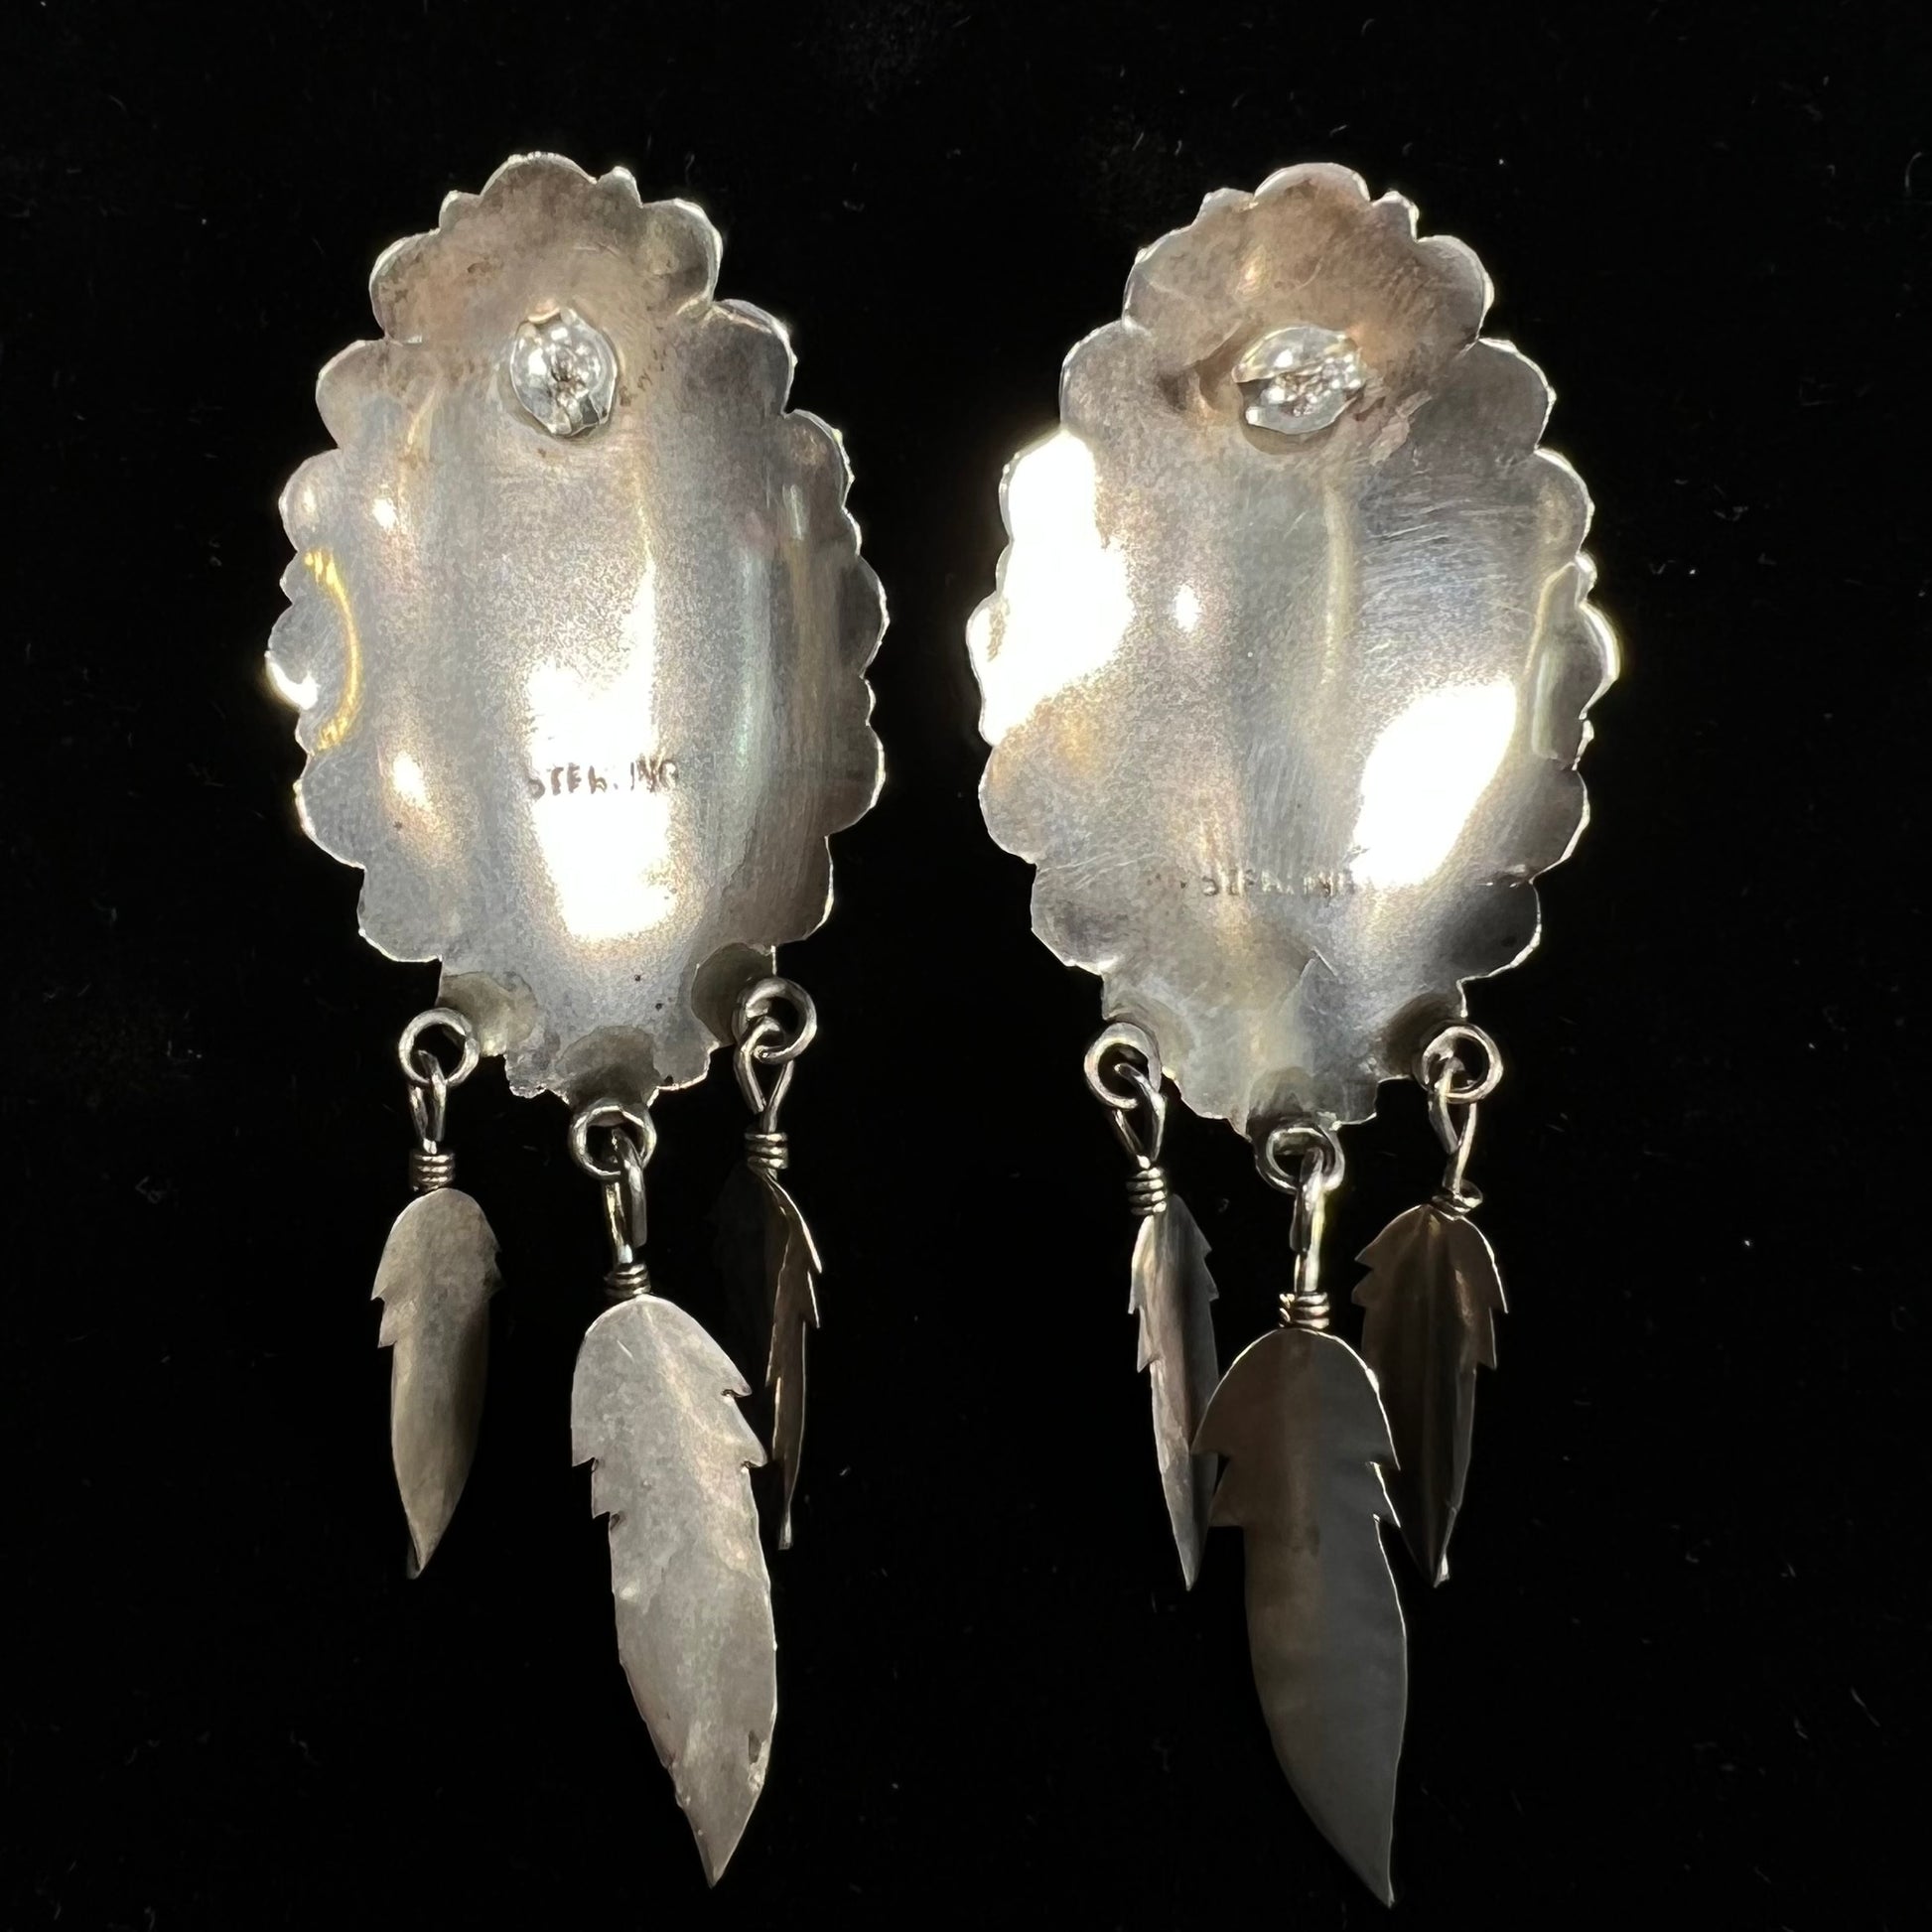 A pair of Native American style feather dangle earrings inlaid with mother of pearl shell and turquoise.